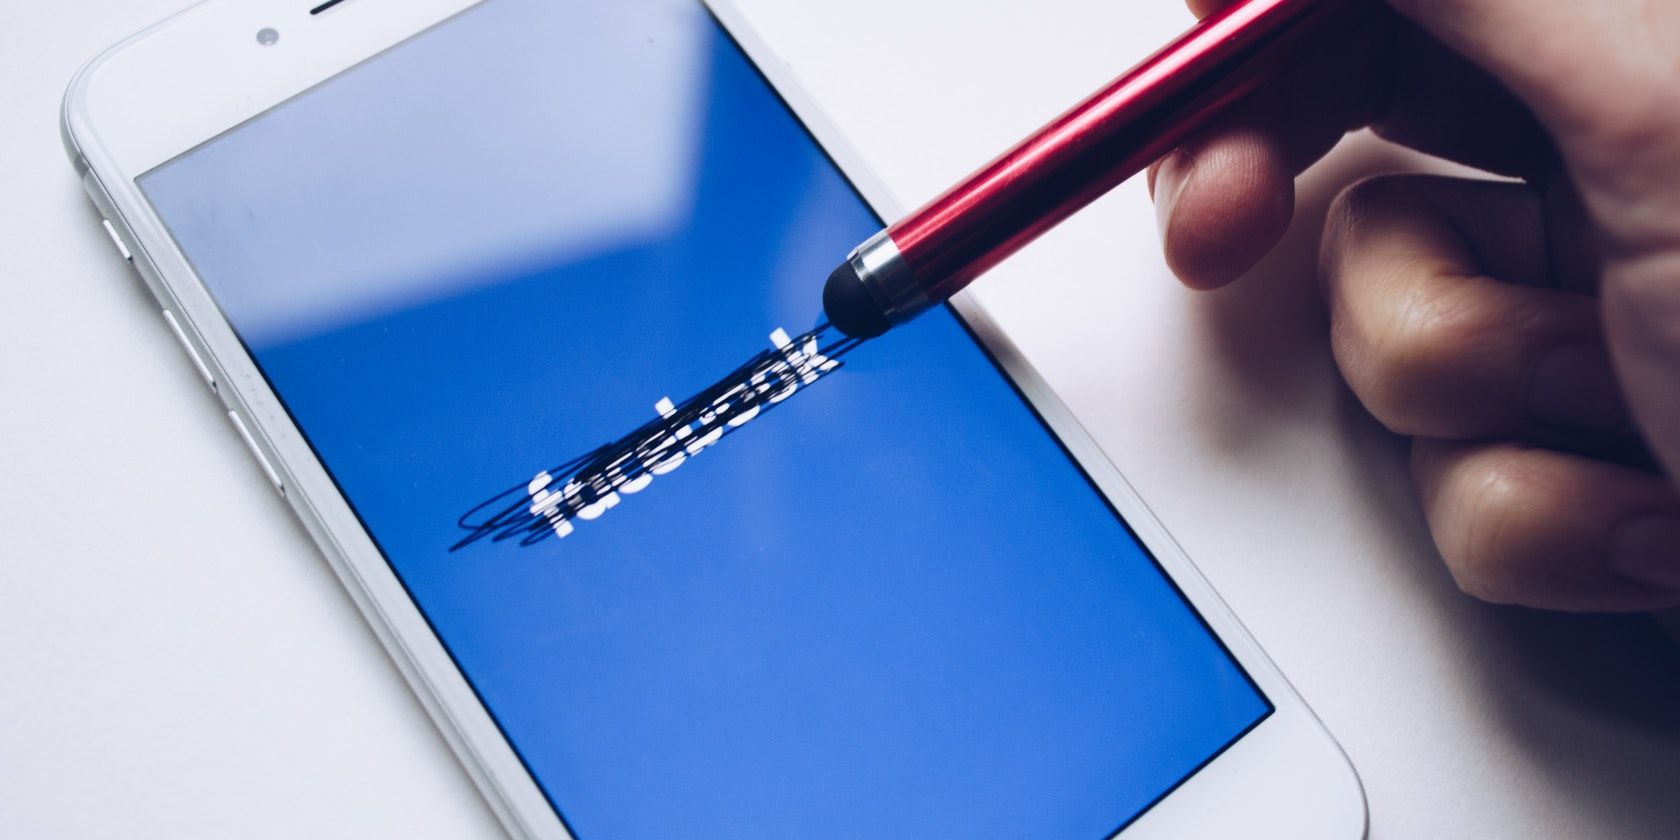 stylus scribbling over Facebook logo on iPhone